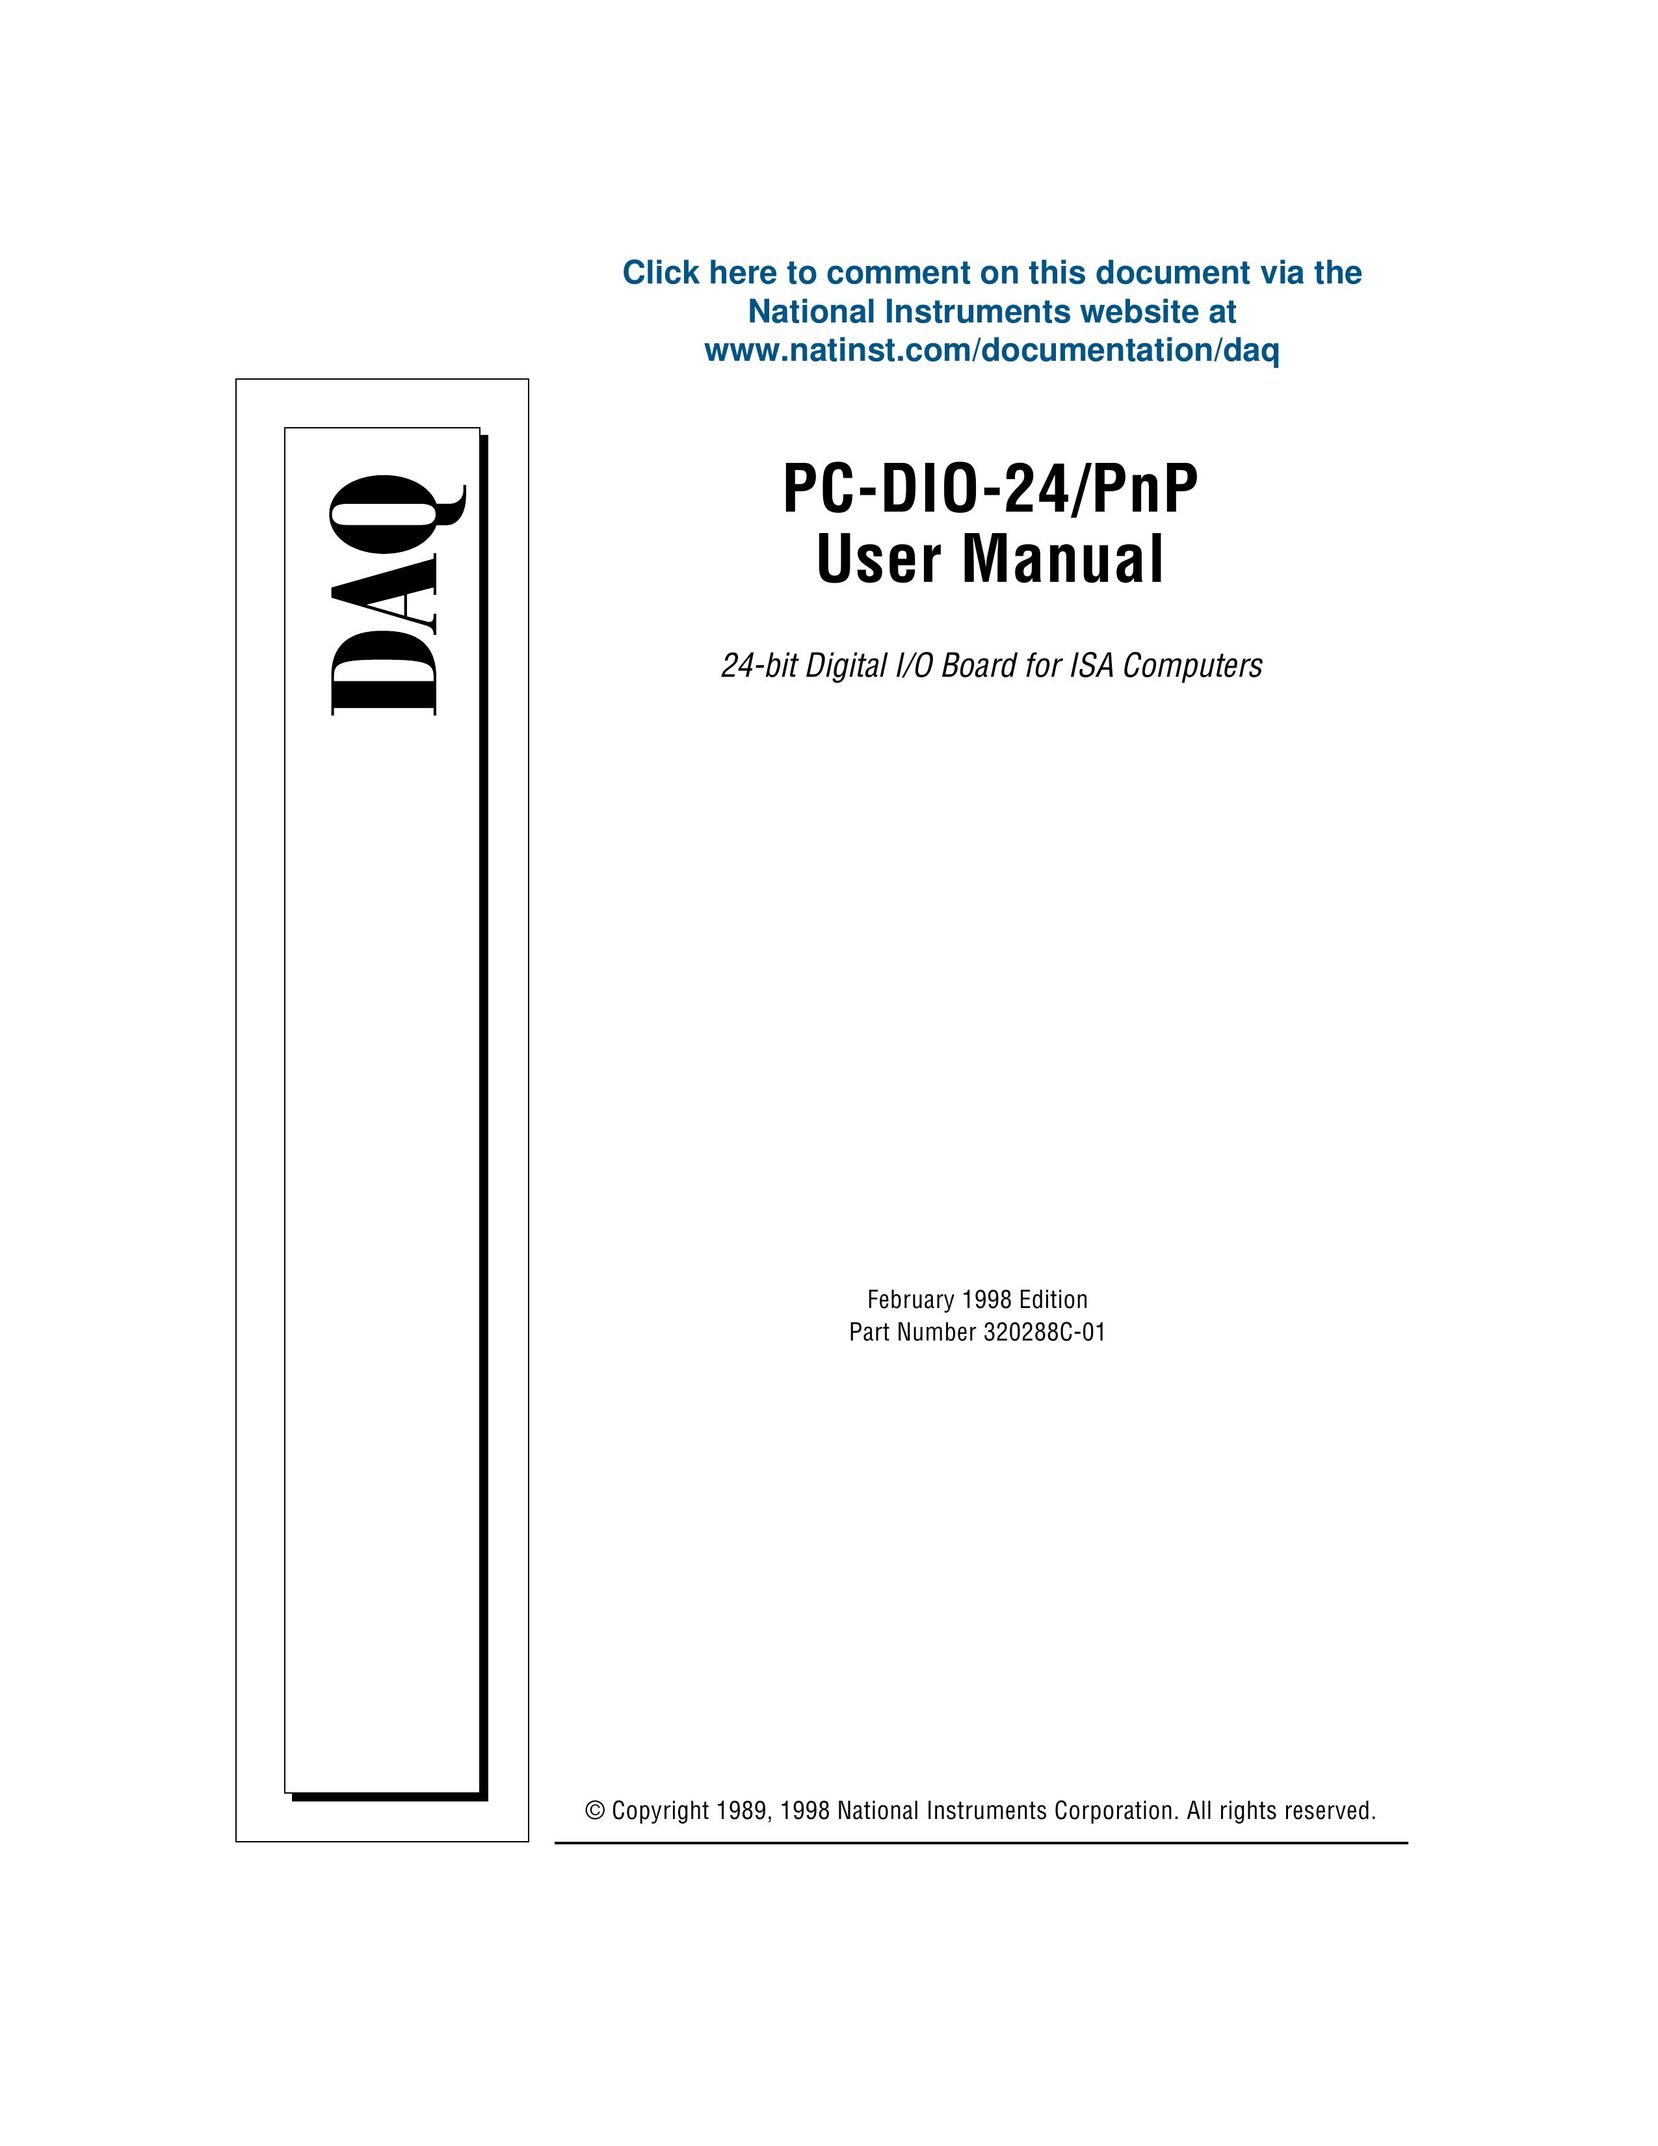 National Instruments PC-DIO-24/PnP Switch User Manual